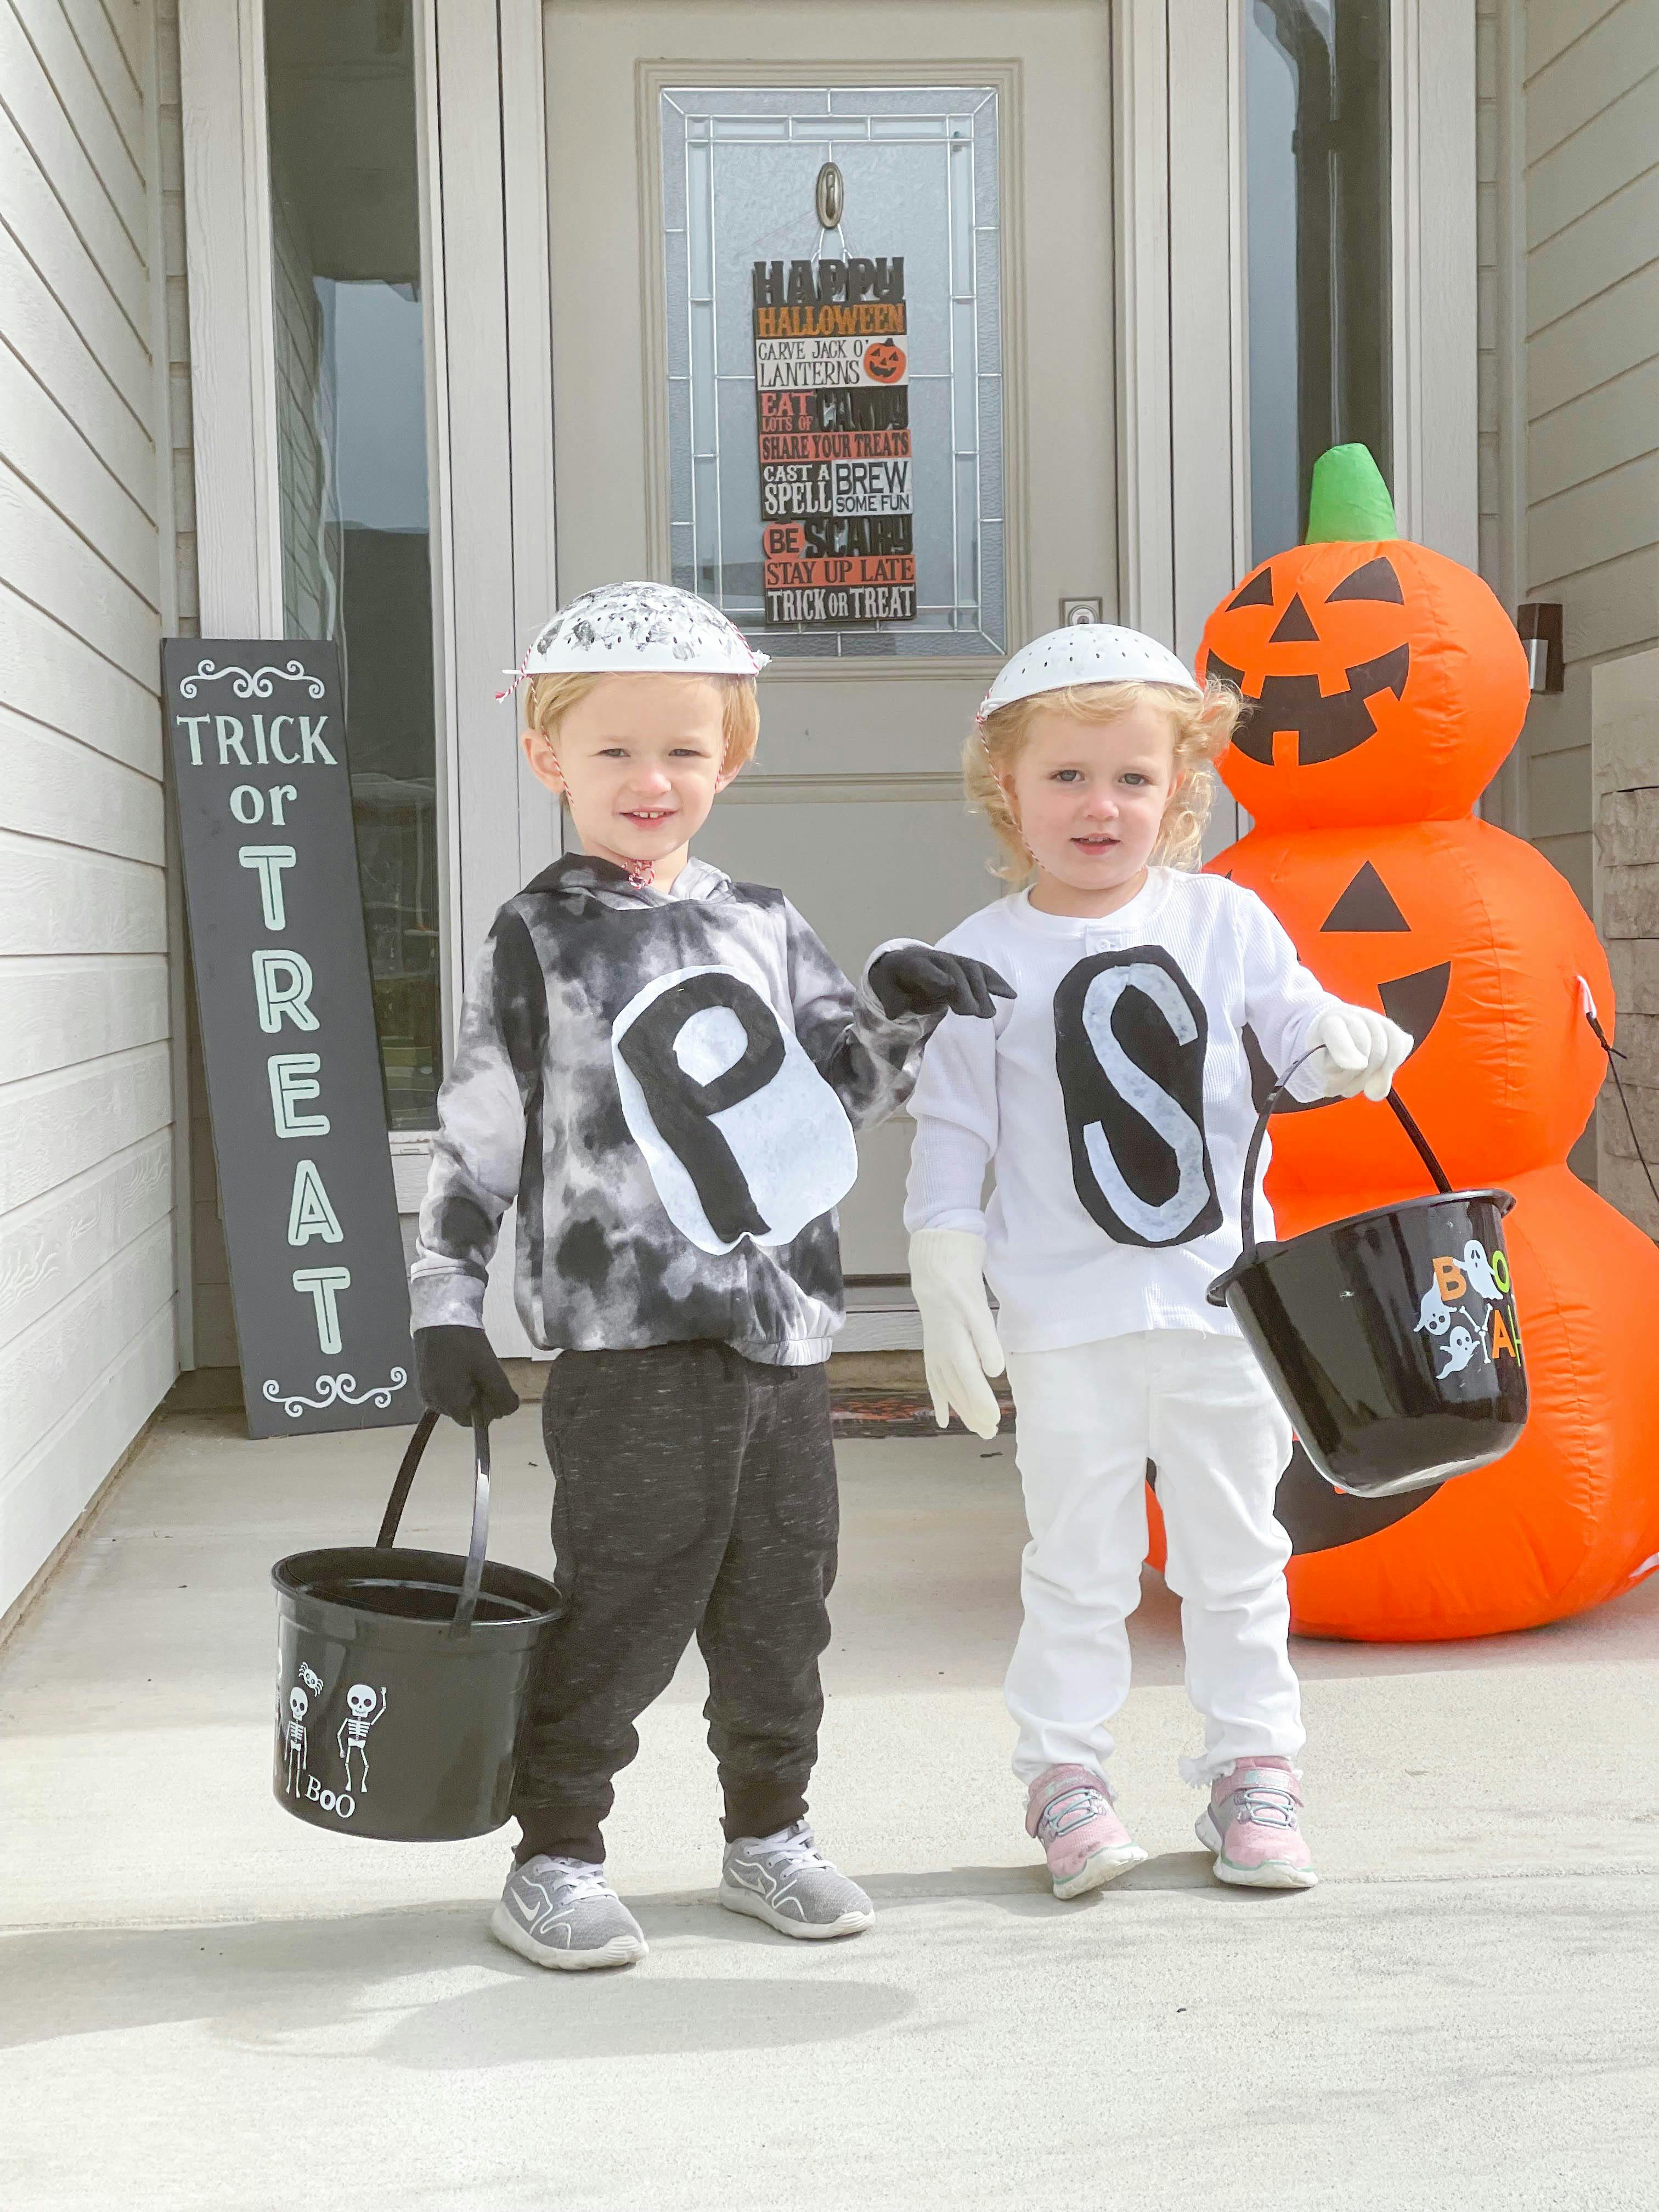 birth Oath Parcel 16 DIY Halloween Costumes for Kids Under $10 - The Krazy Coupon Lady